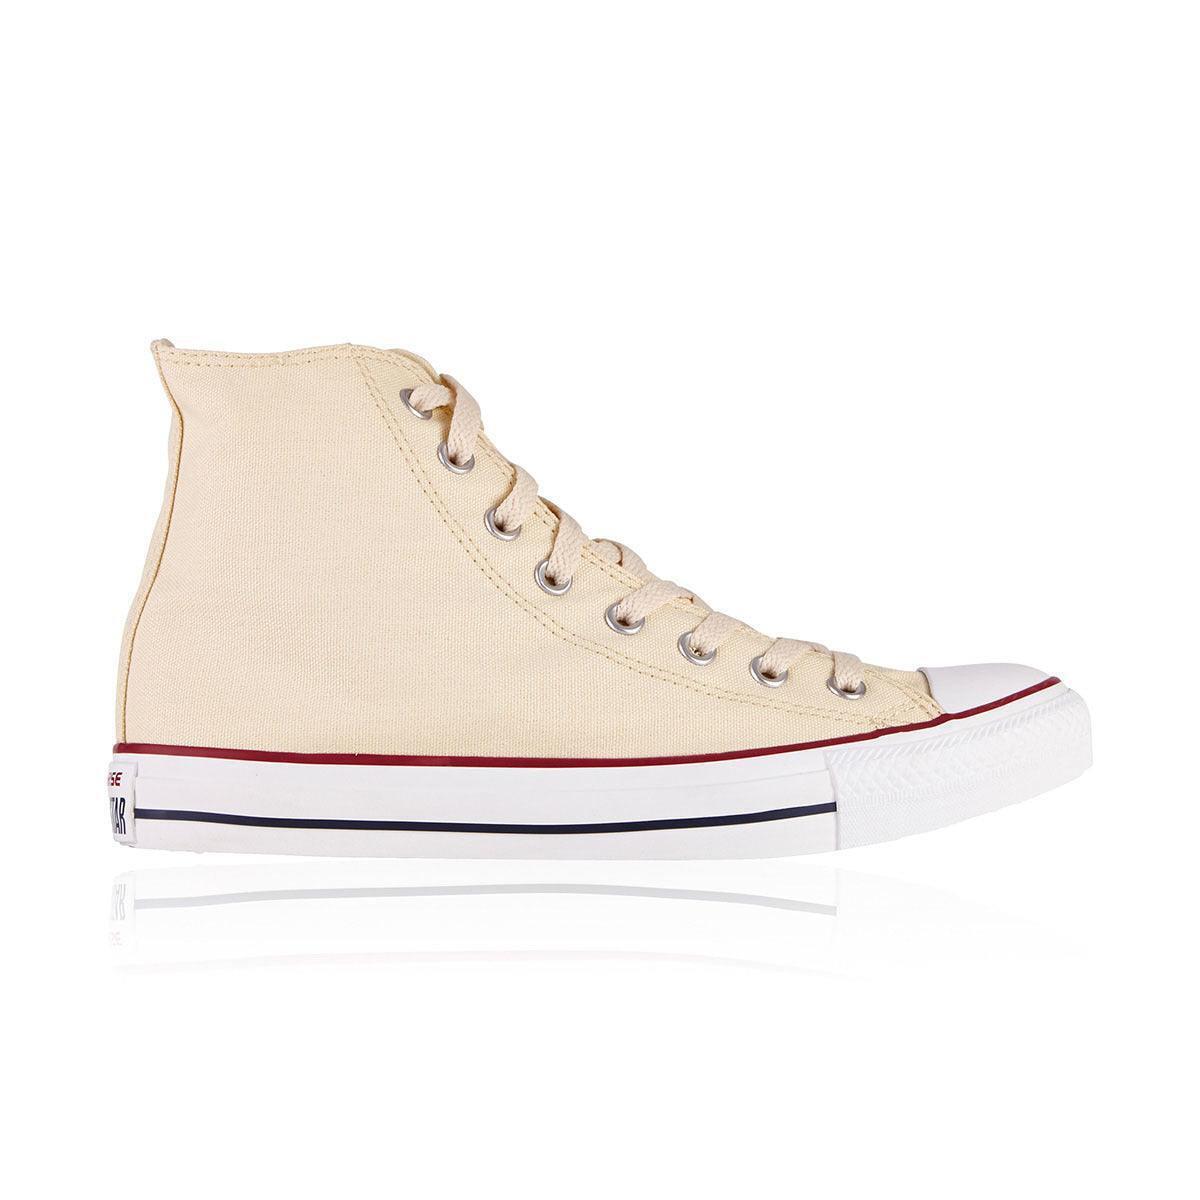 Converse - Chuck Taylor All Star Hi Top Unisex Shoes - Mens US 8.5/Womens US 10.5 - Unbleached White